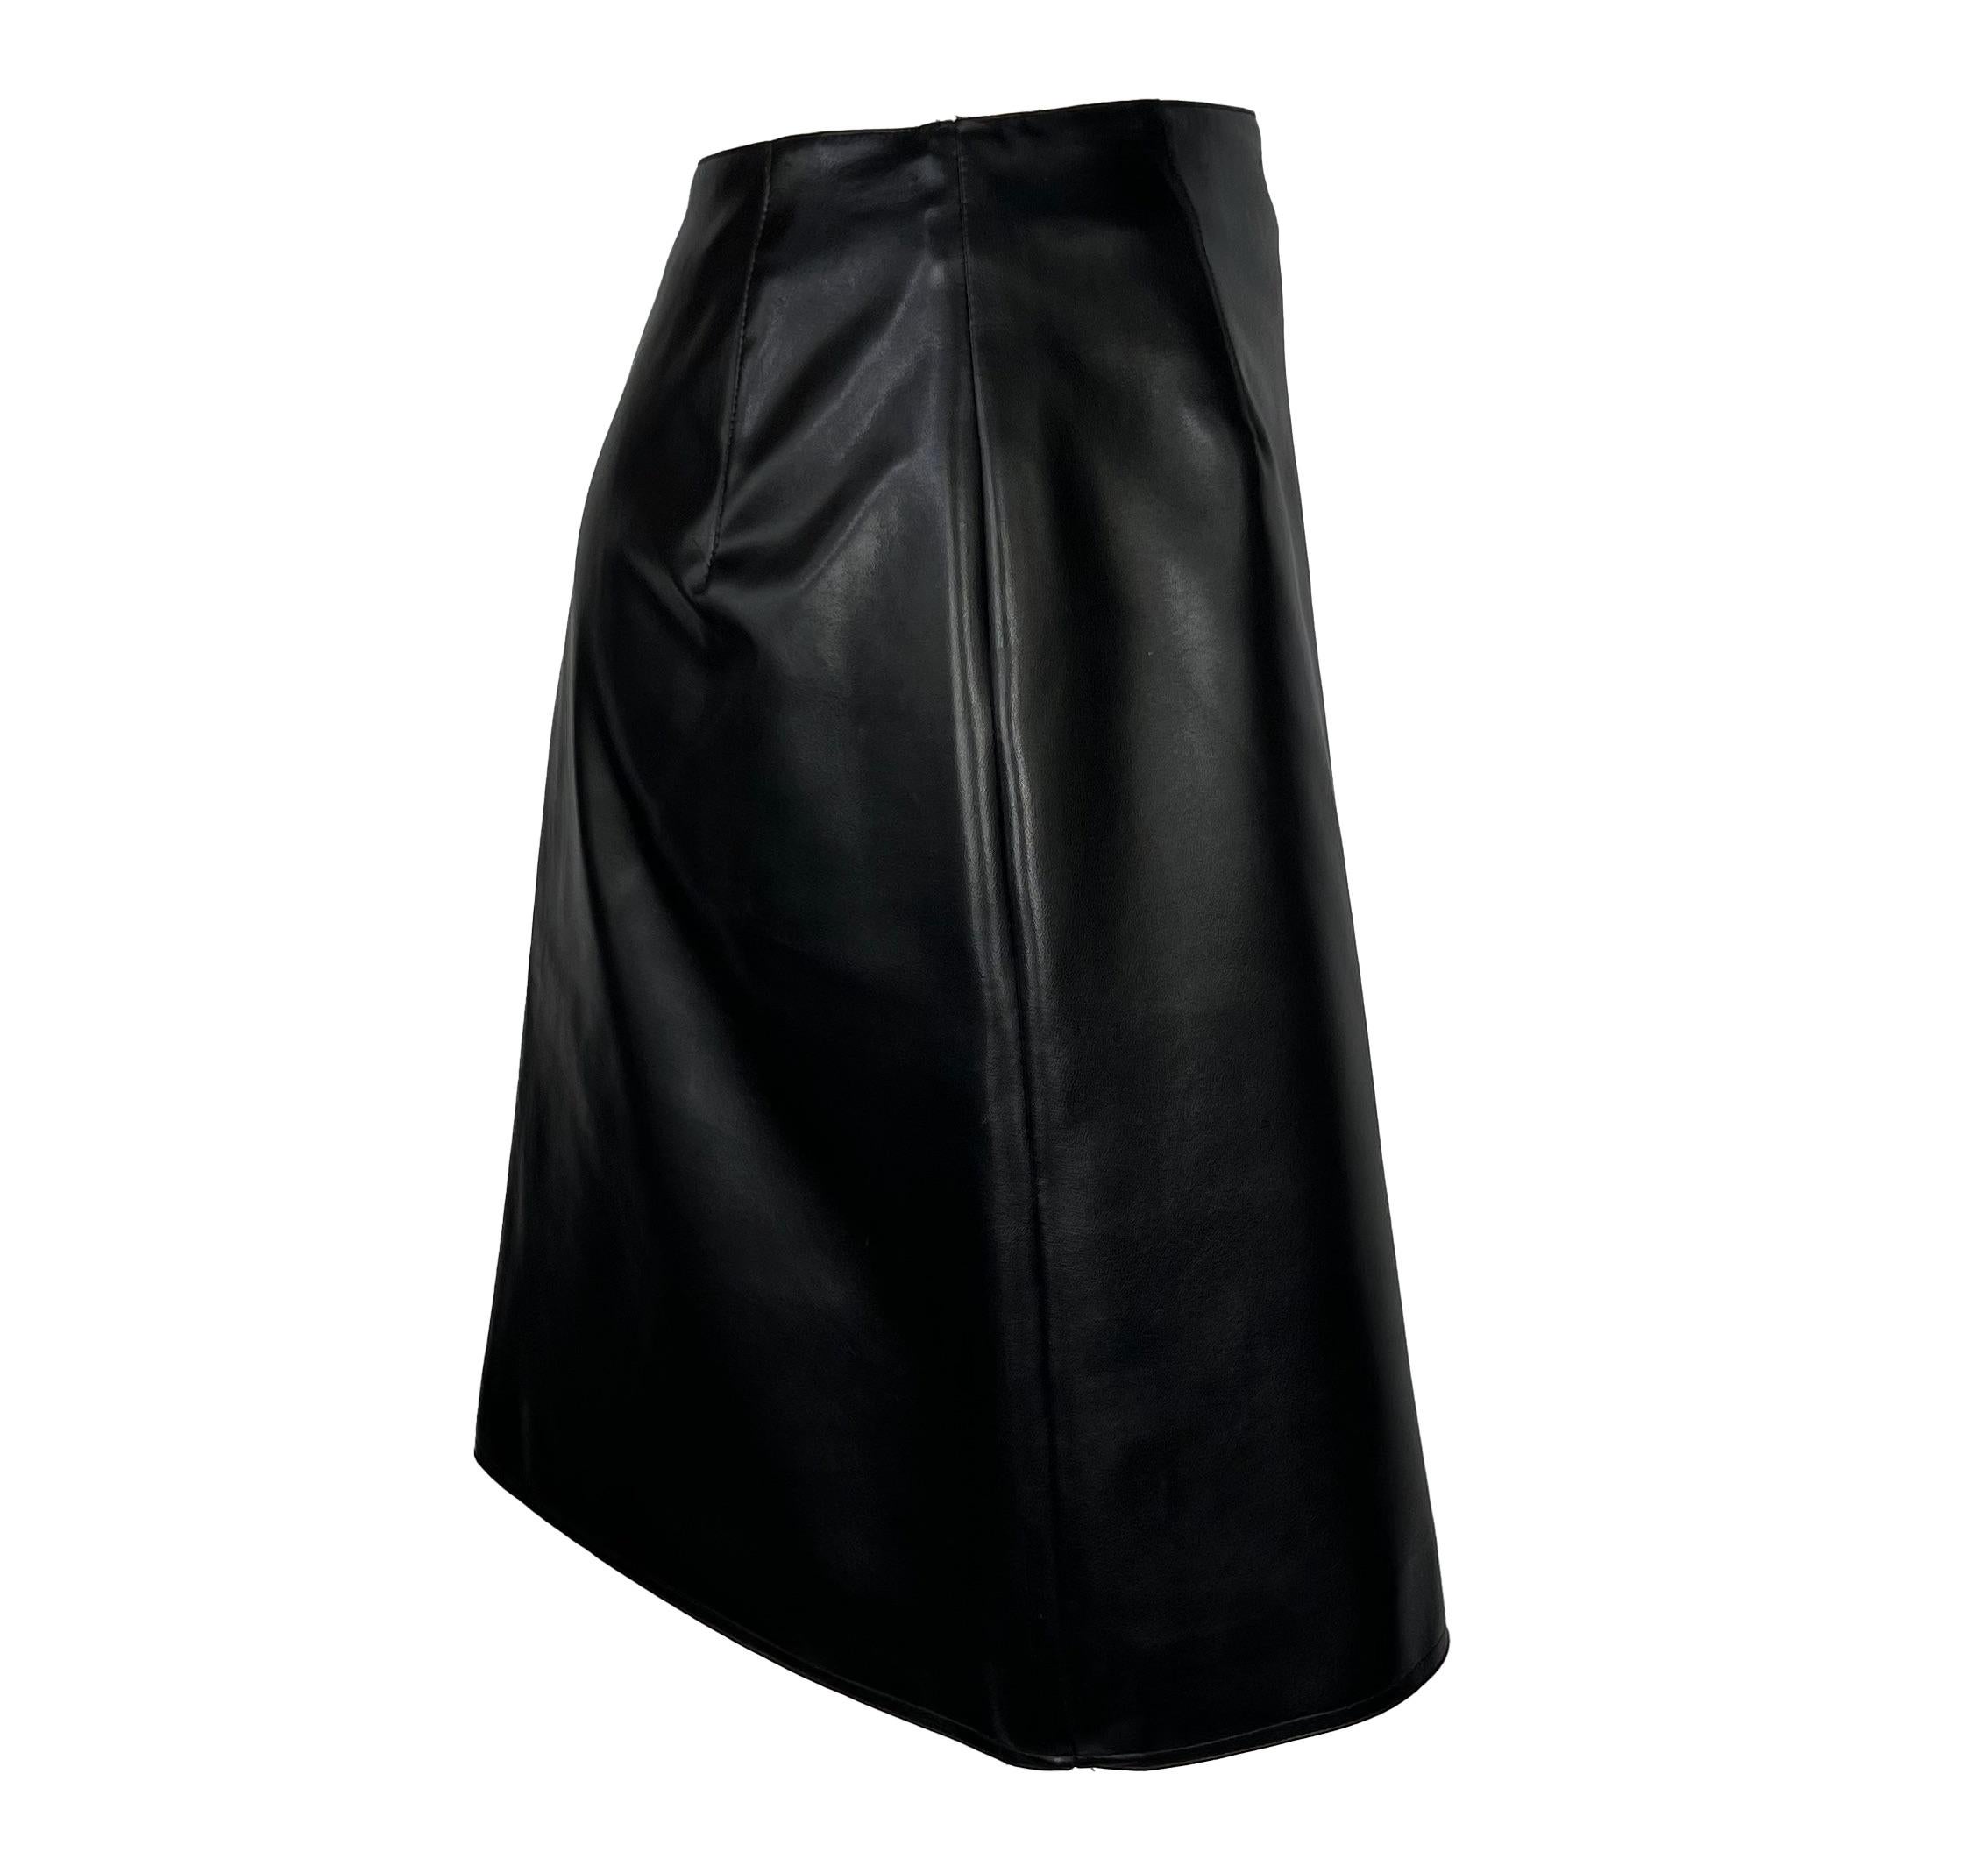 1996 Gianni Versace Couture Black Vegan Leather Mini Skirt For Sale 1